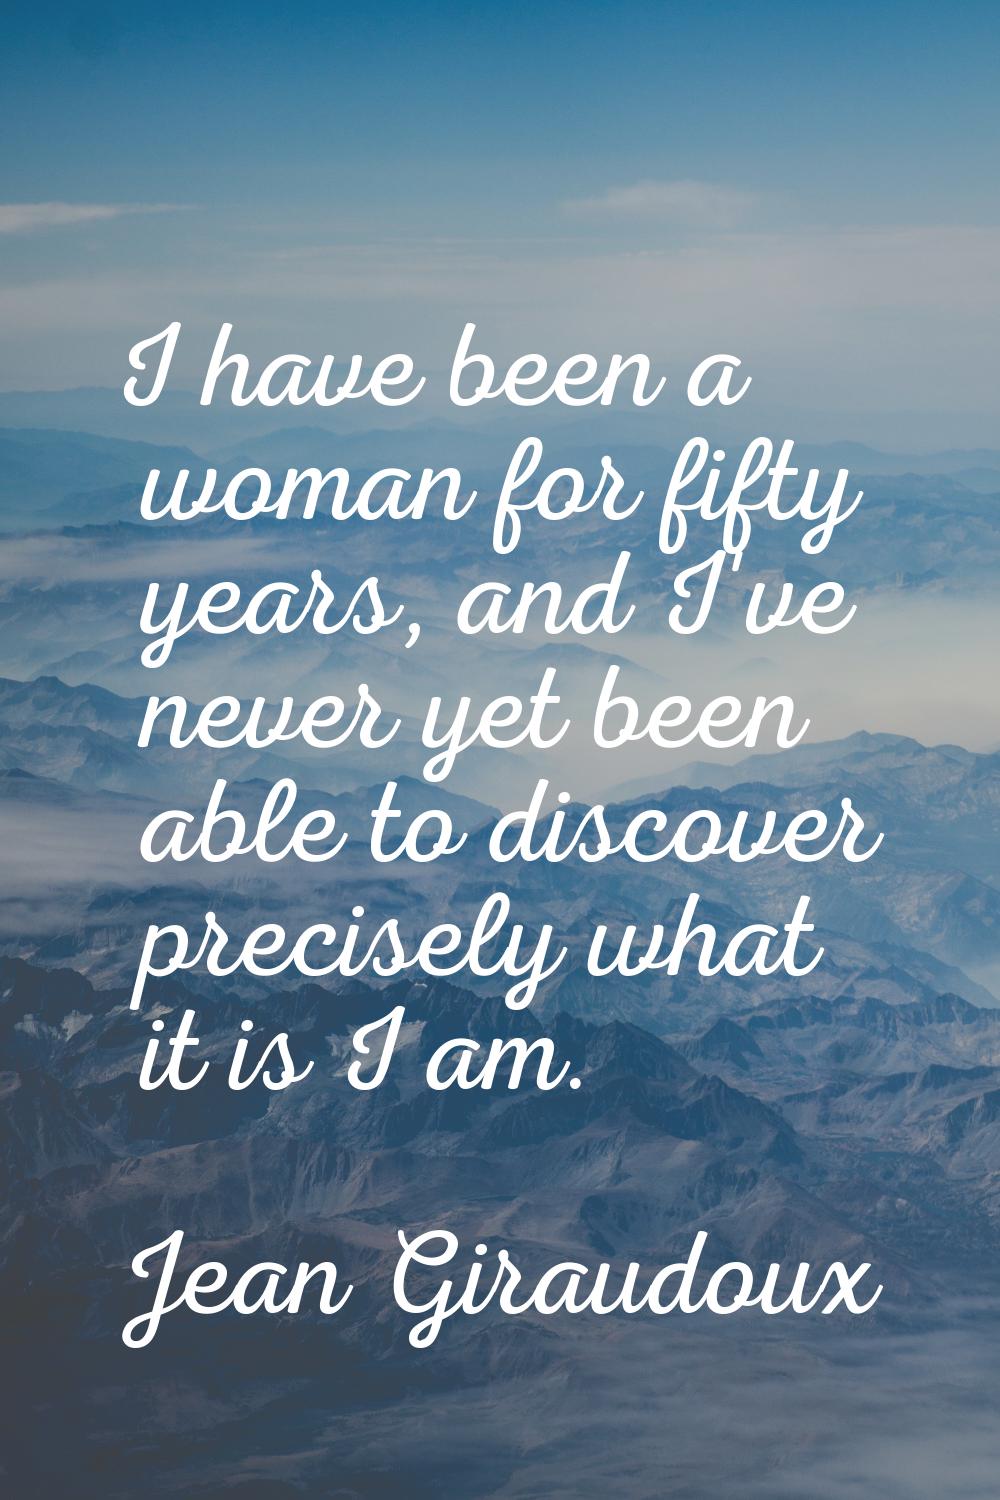 I have been a woman for fifty years, and I've never yet been able to discover precisely what it is 